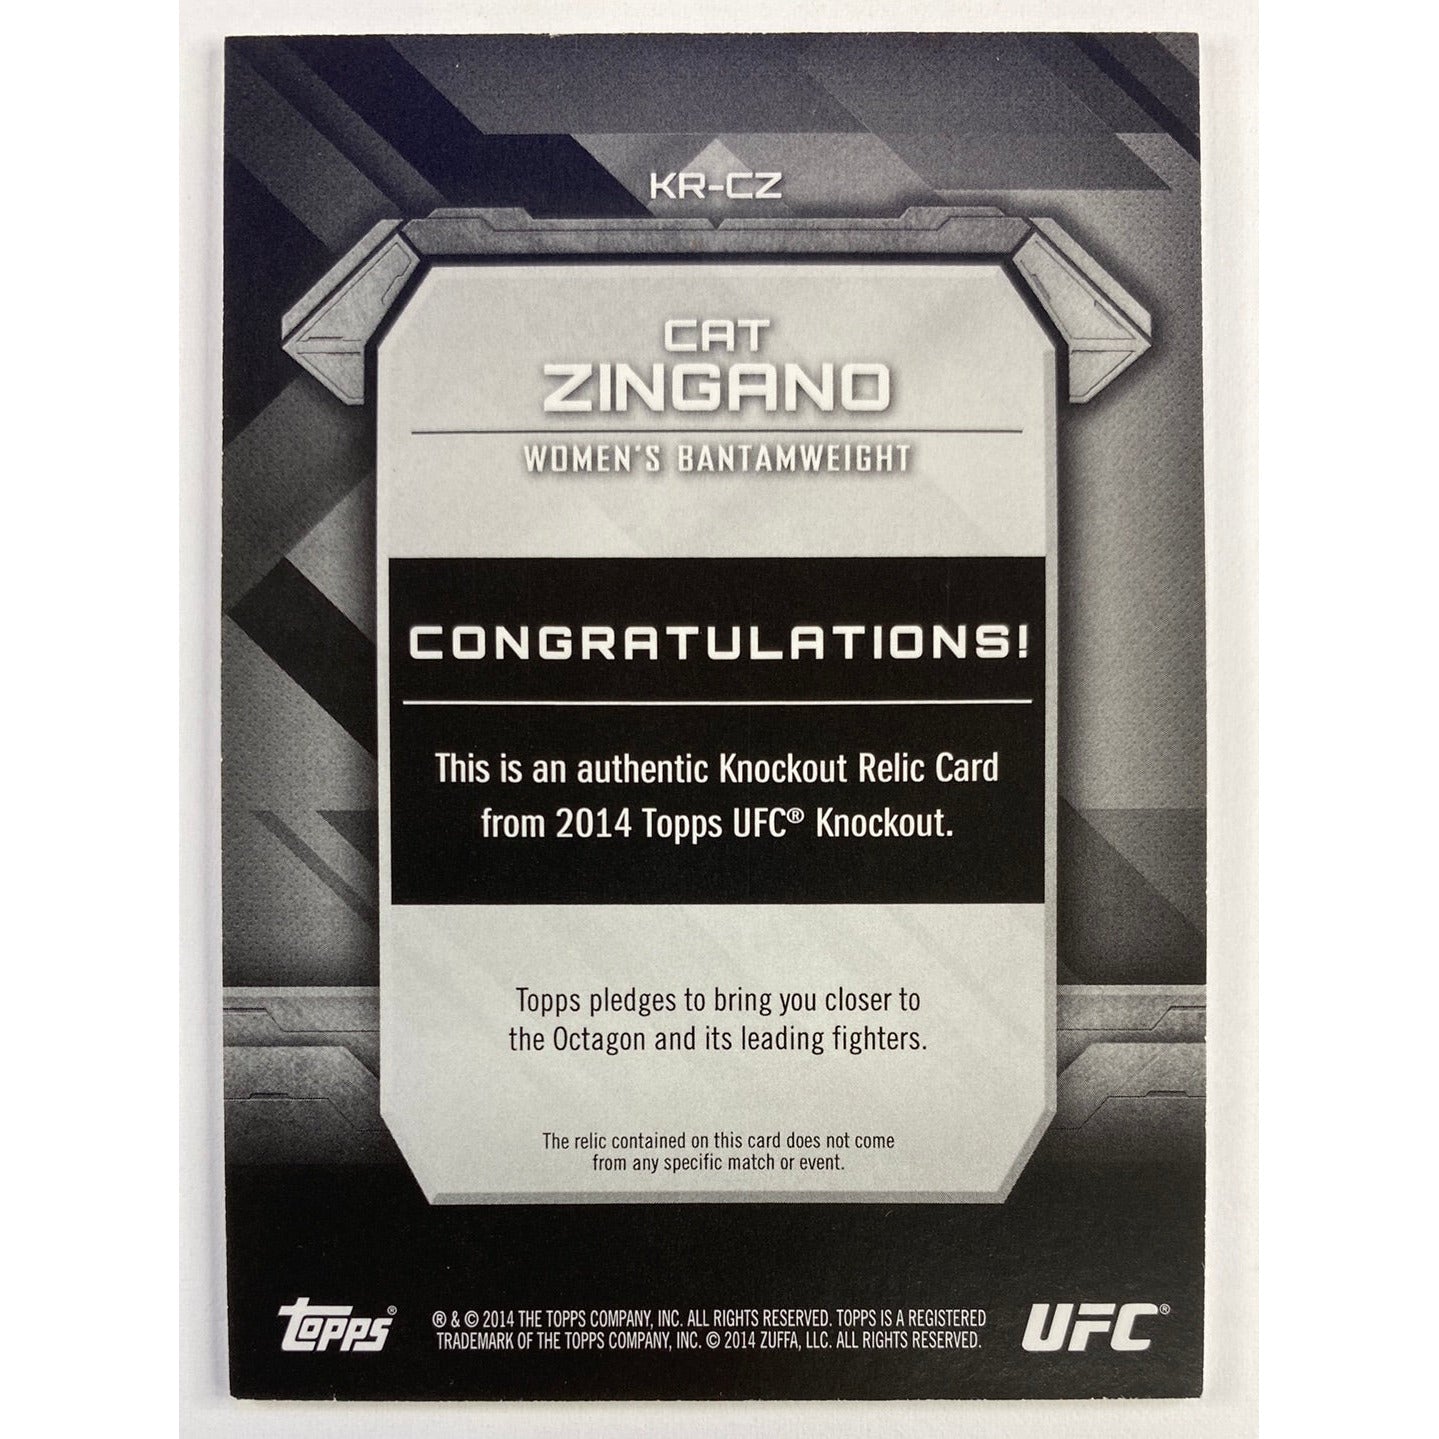 2014 Topps Knockout Cat Zingano Fighter Worn Relic /188